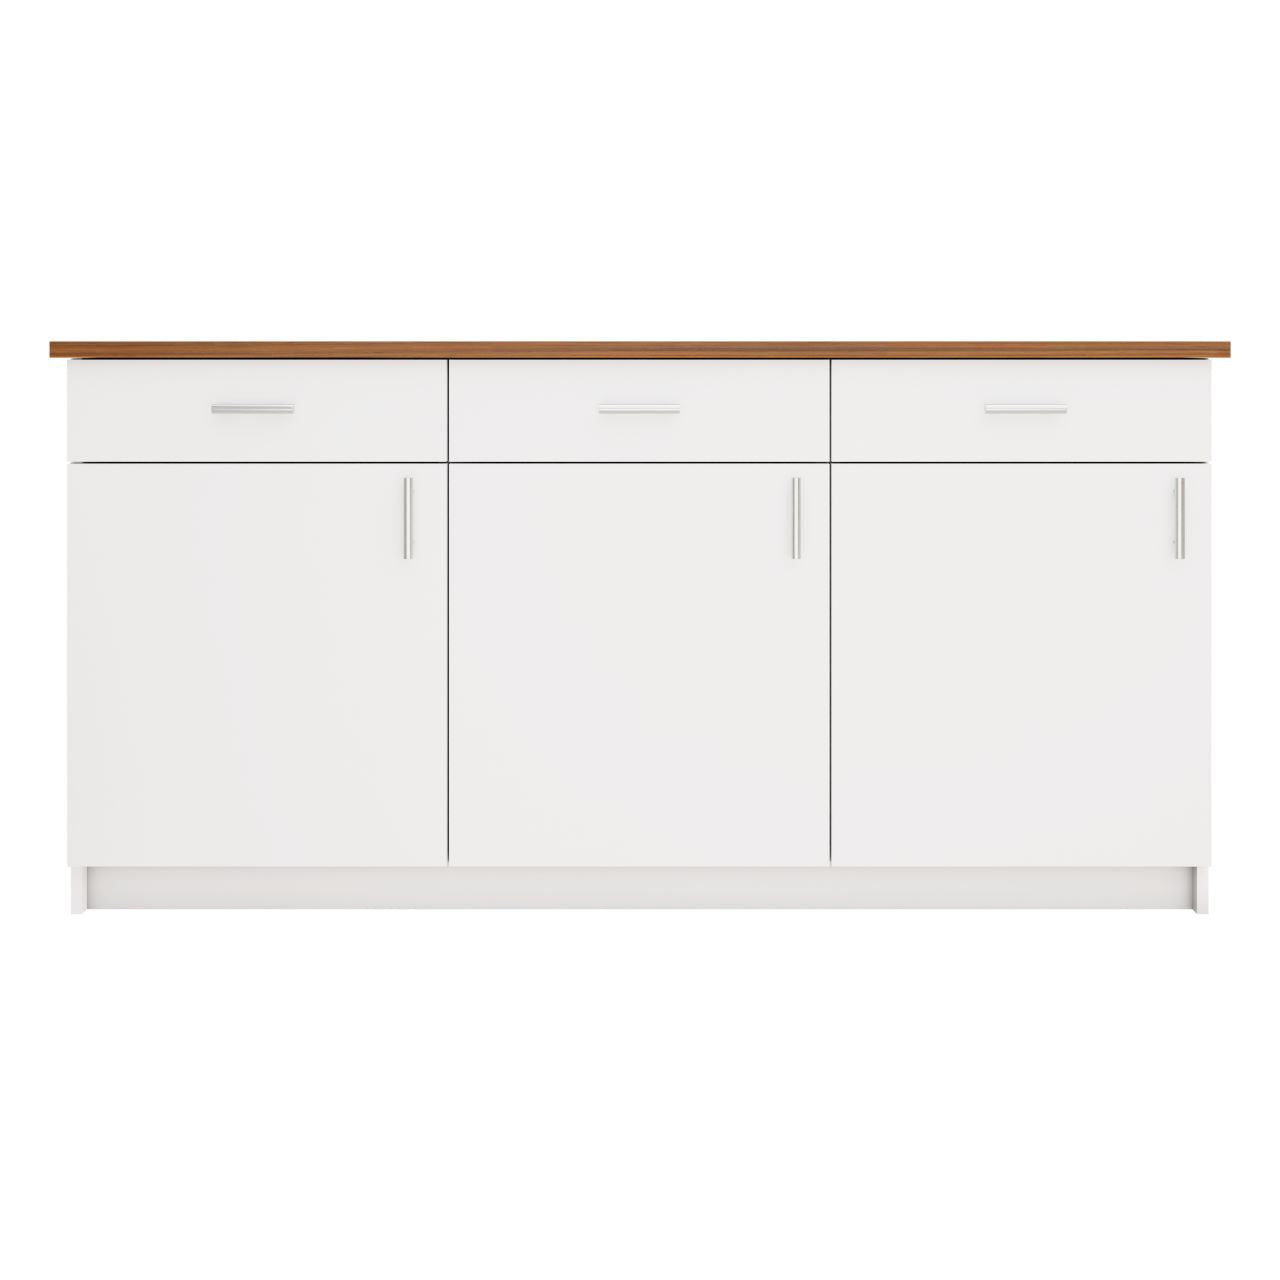 VIKI Kitchen Base Cabinets with 3 drawer , 3 doors - size : 180x88x60 CM ( Frosty White ) kitchen cabinet , kitchen cabinets storage racks ,modular kitchen cabinets furniture set , kitchen cabinet wooden , kitchen cabinet drawer , kitchen cabinets engineers wood , kitchen cabinet for microwave oven and for storage , VIKI FURNITURE   